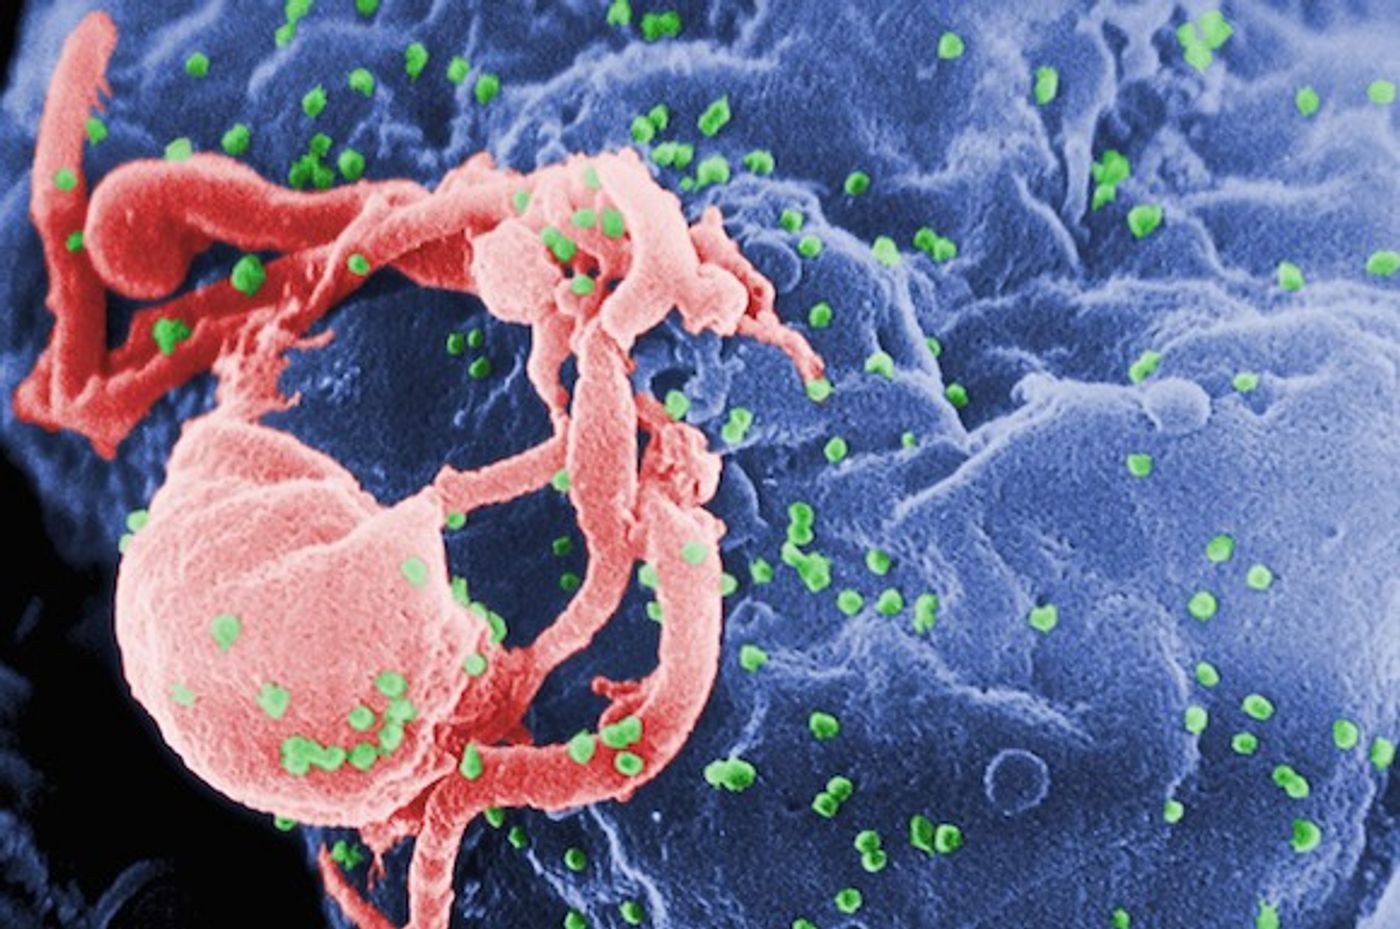 Researchers have come one step closer to eradicating HIV.